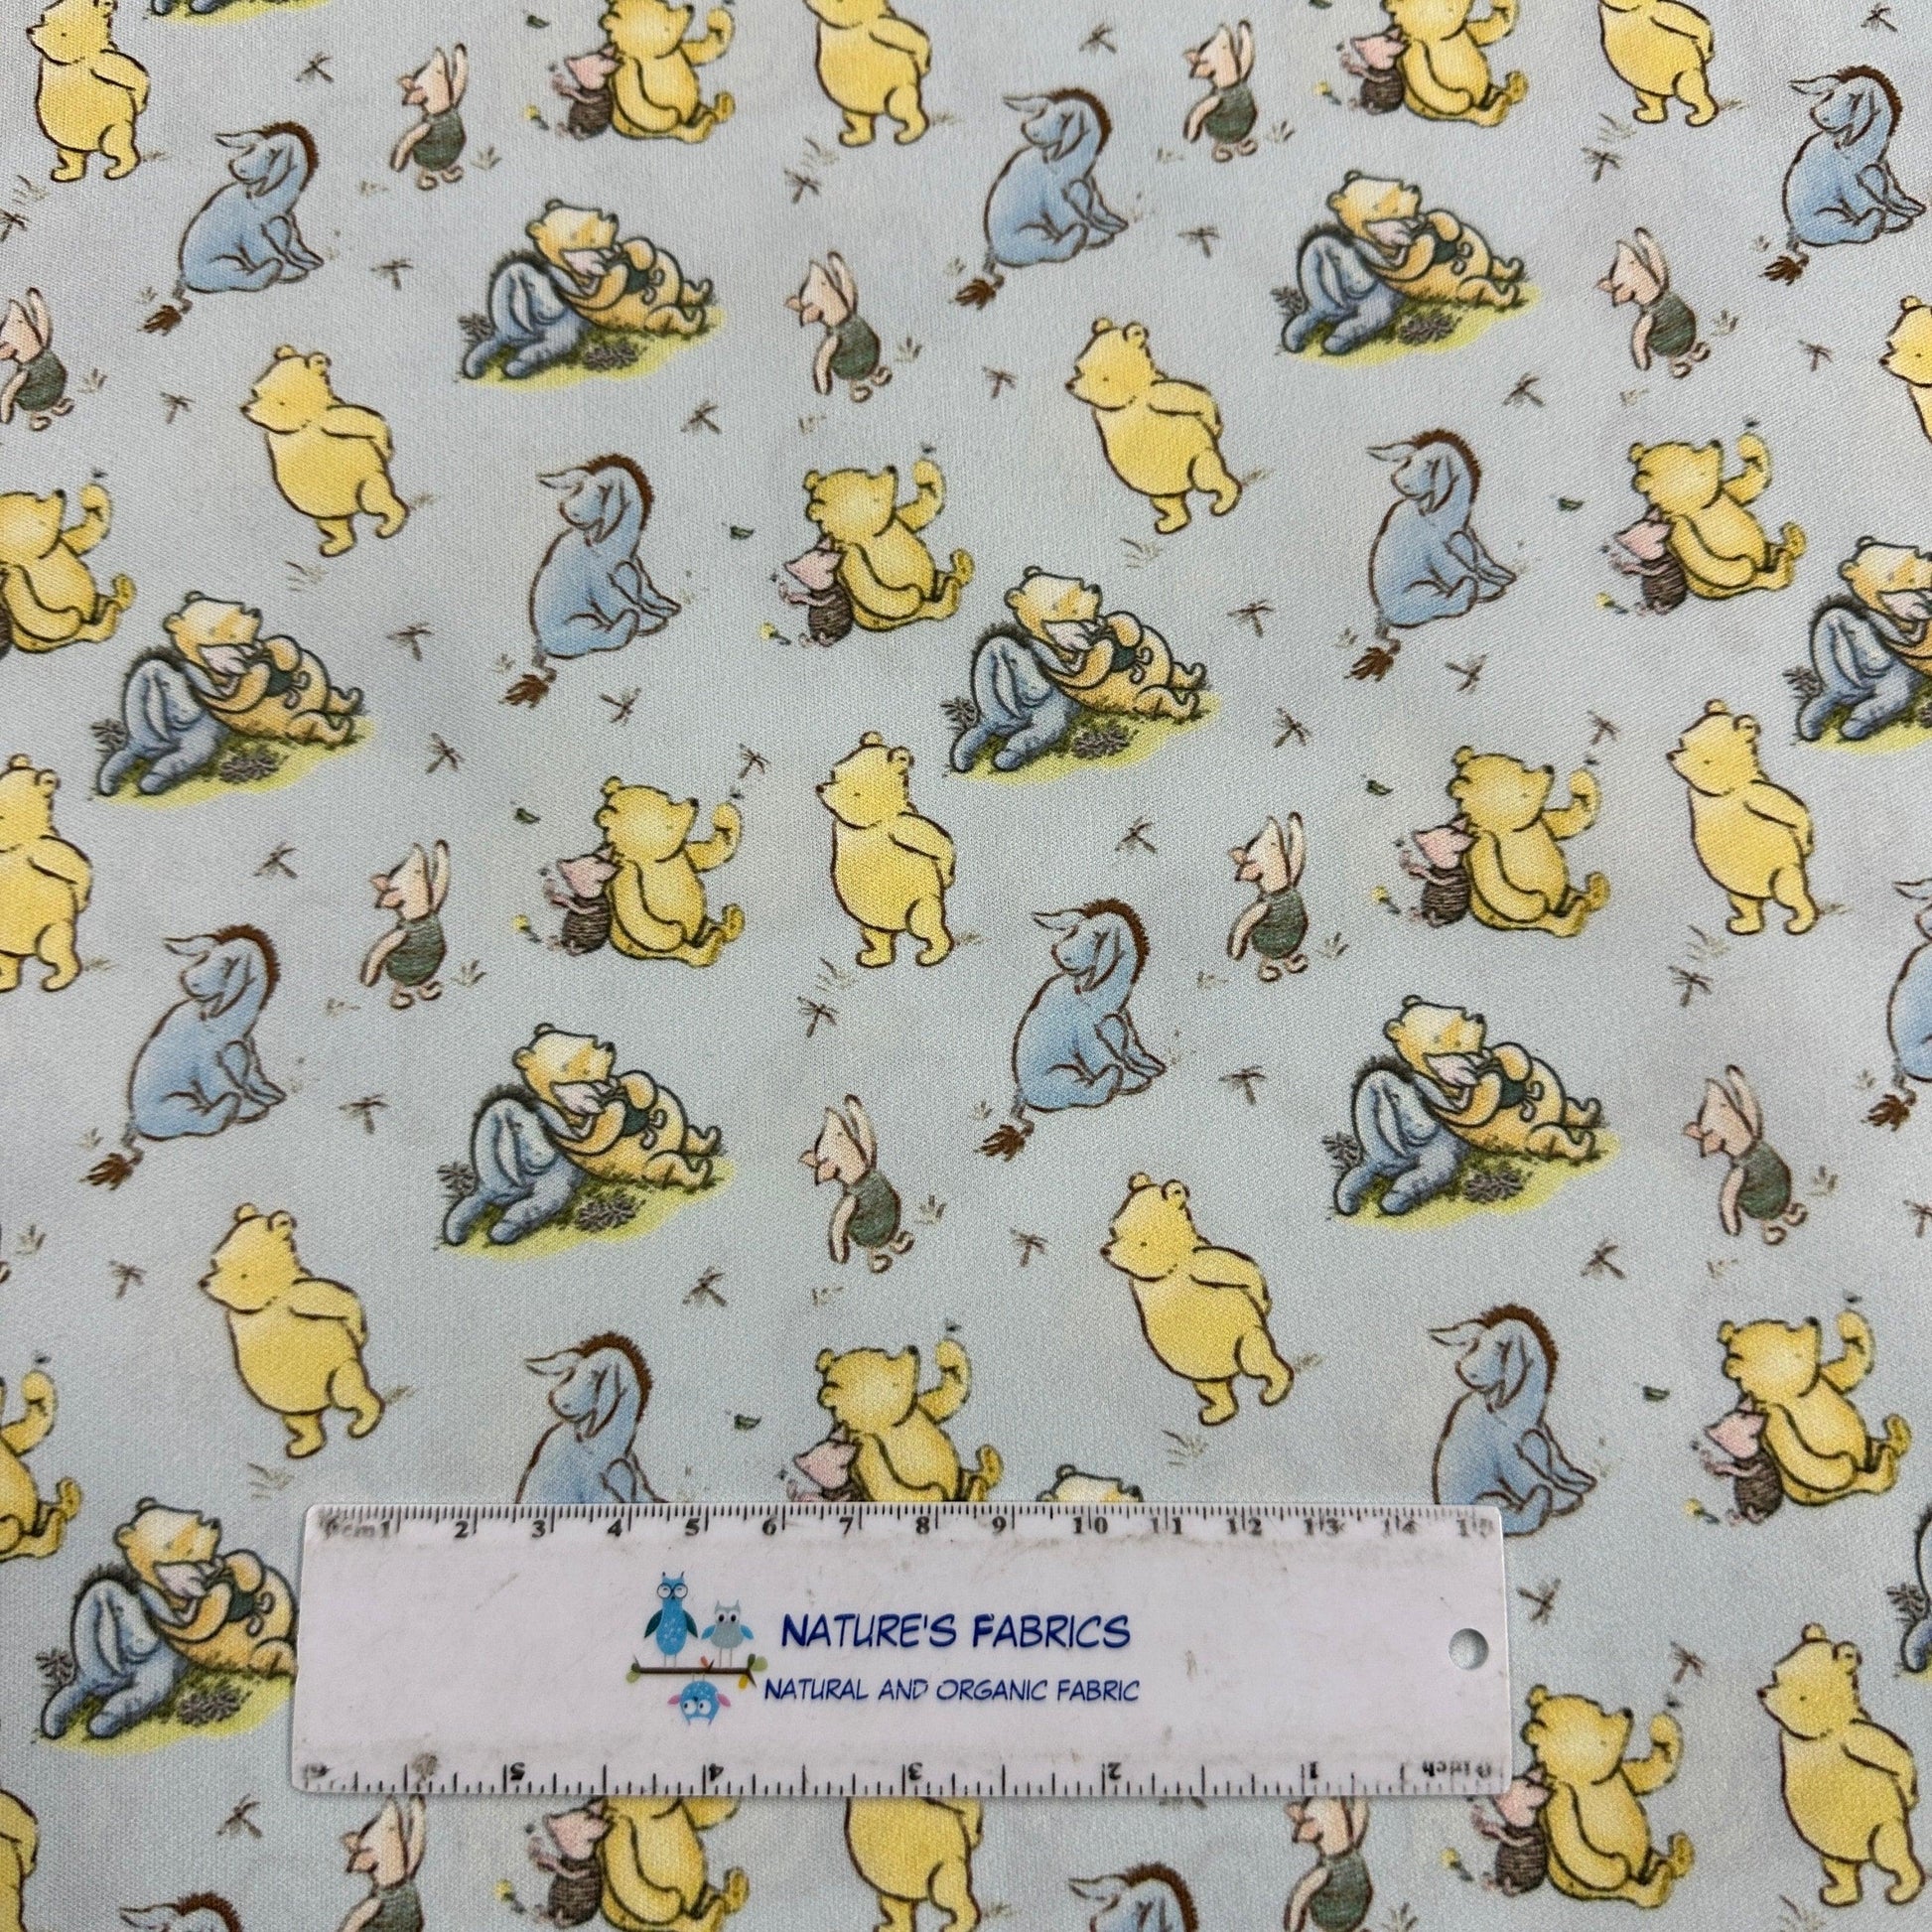 Winnie the Pooh and Friends on Blue 1 mil PUL Fabric - Made in the USA - Nature's Fabrics